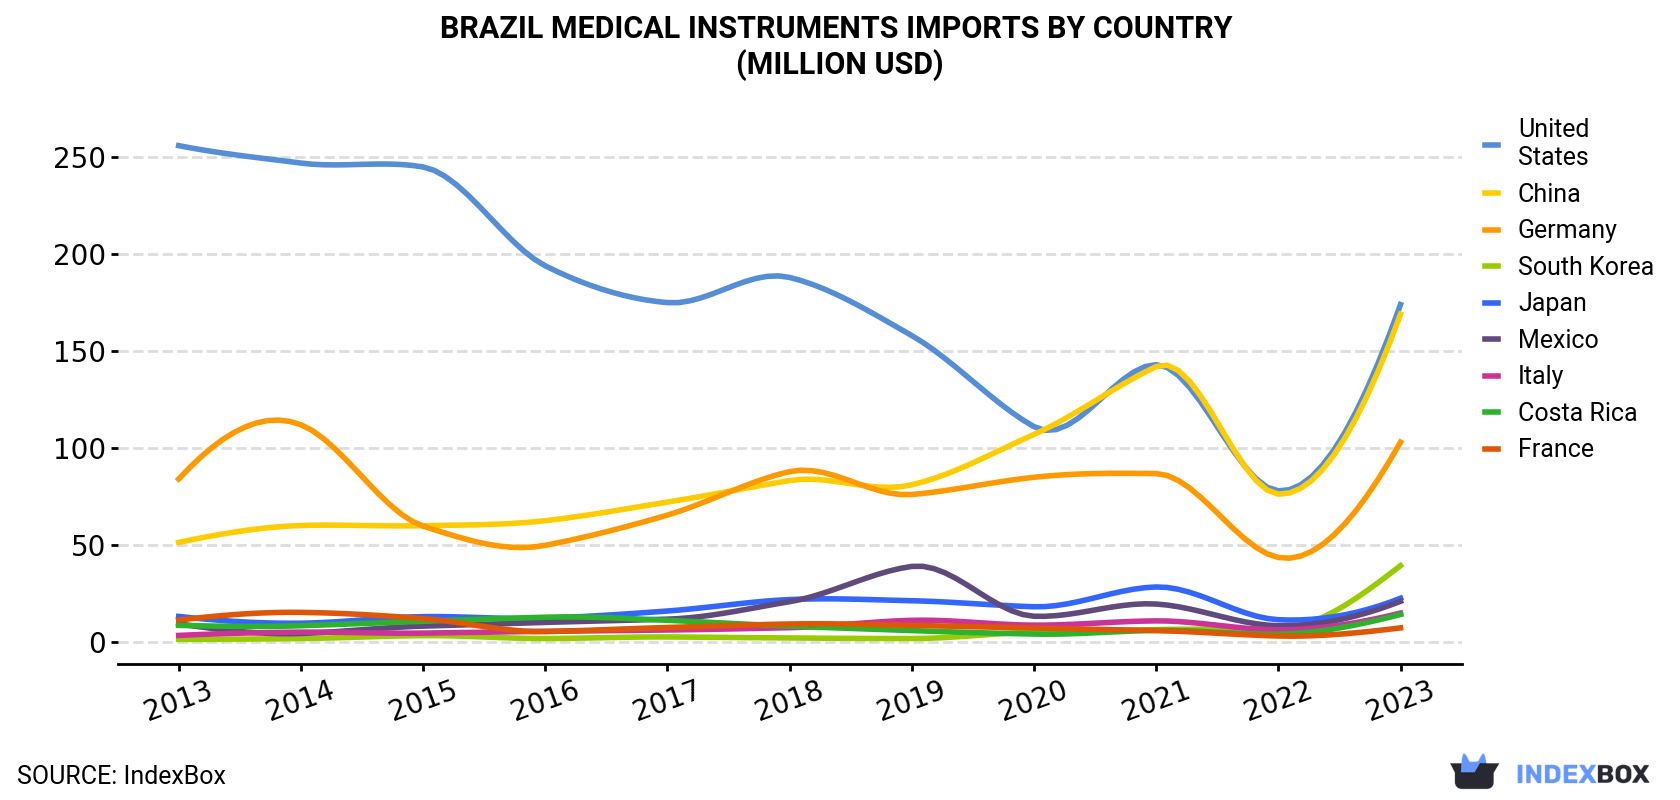 Brazil Medical Instruments Imports By Country (Million USD)